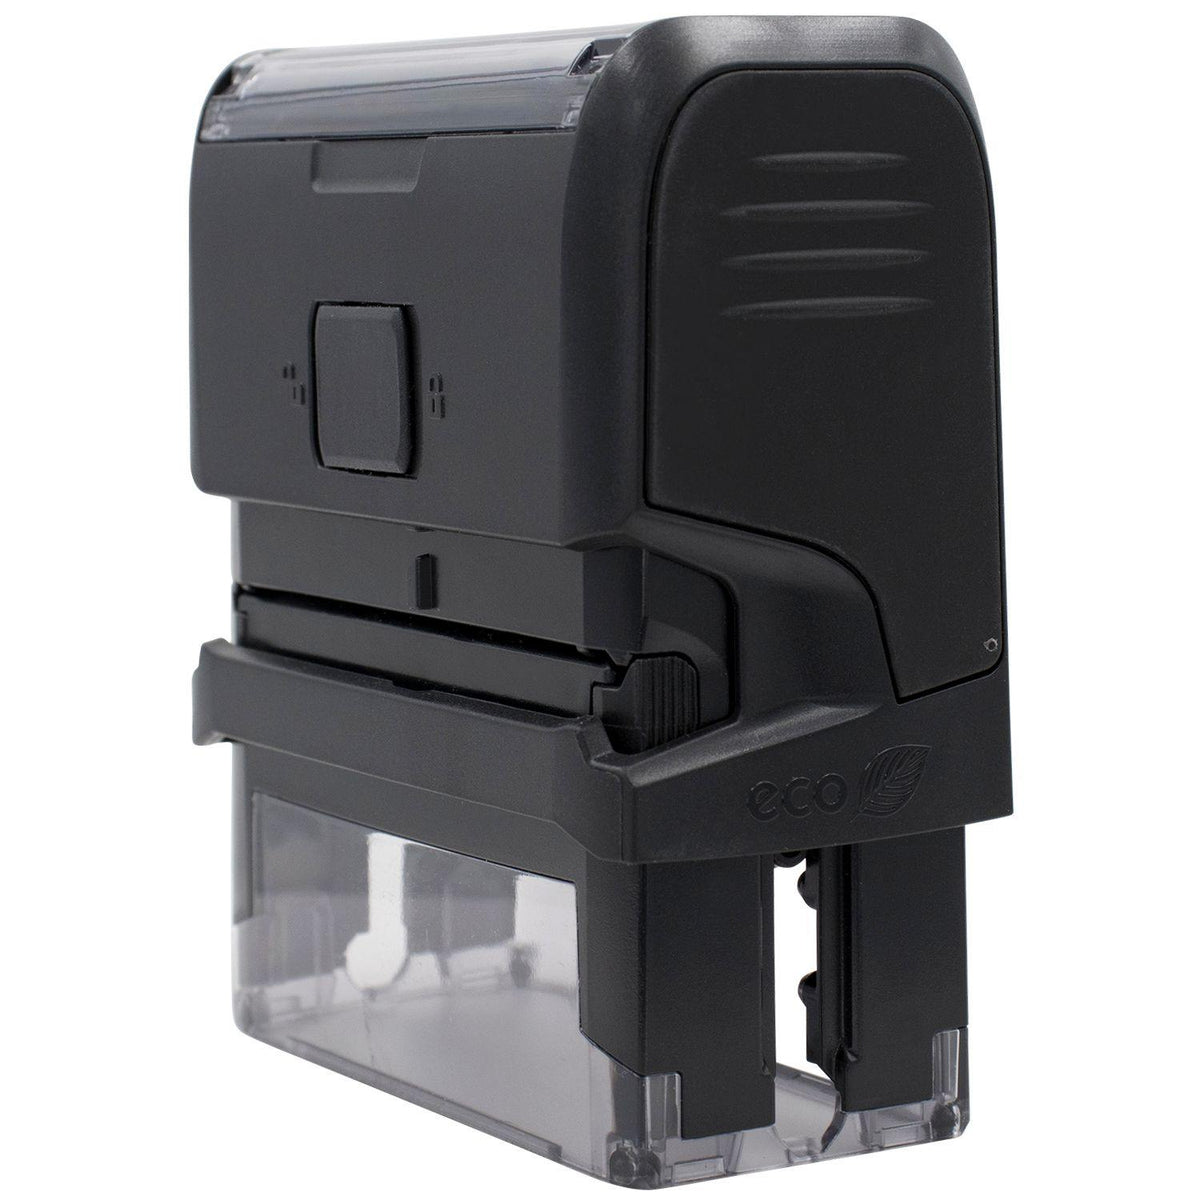 Large Self-Inking Void with Strikelines Stamp - Engineer Seal Stamps - Brand_Trodat, Impression Size_Large, Stamp Type_Self-Inking Stamp, Type of Use_Office, Type of Use_Professional